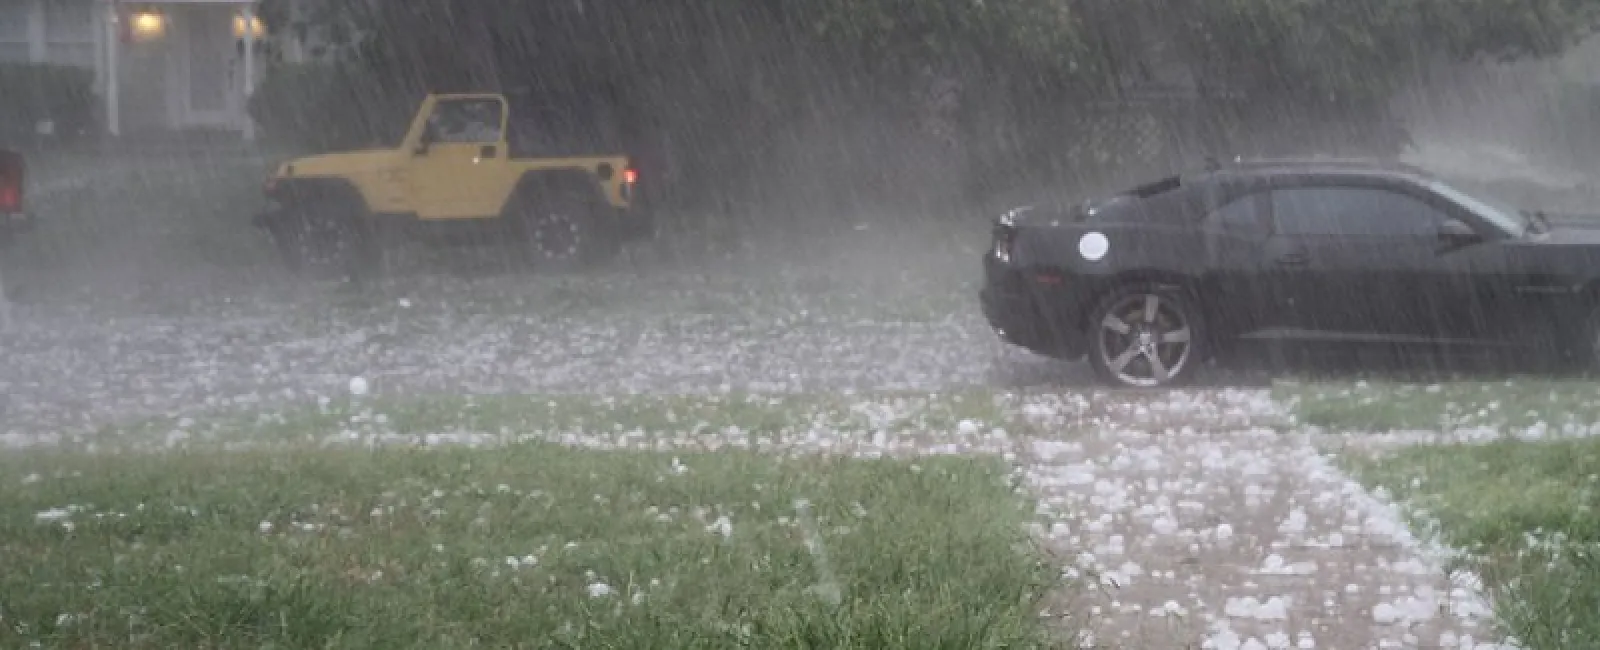 Addressing Hail Damage to Roof Materials After Severe April Storms